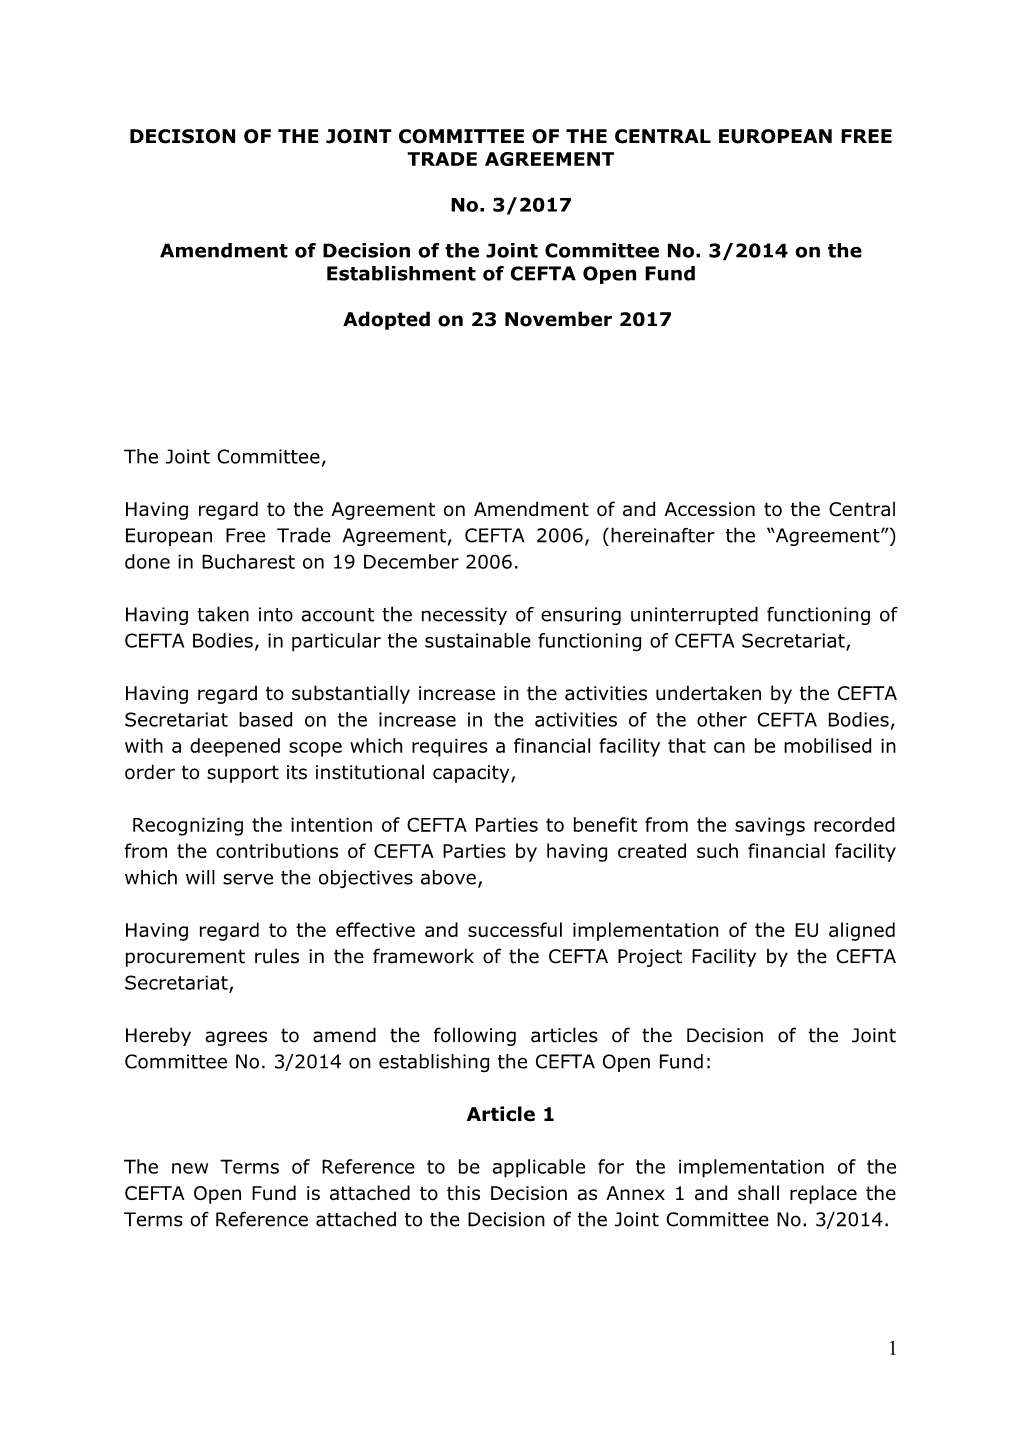 Decision of the Joint Committee of the Central European Free Trade Agreement